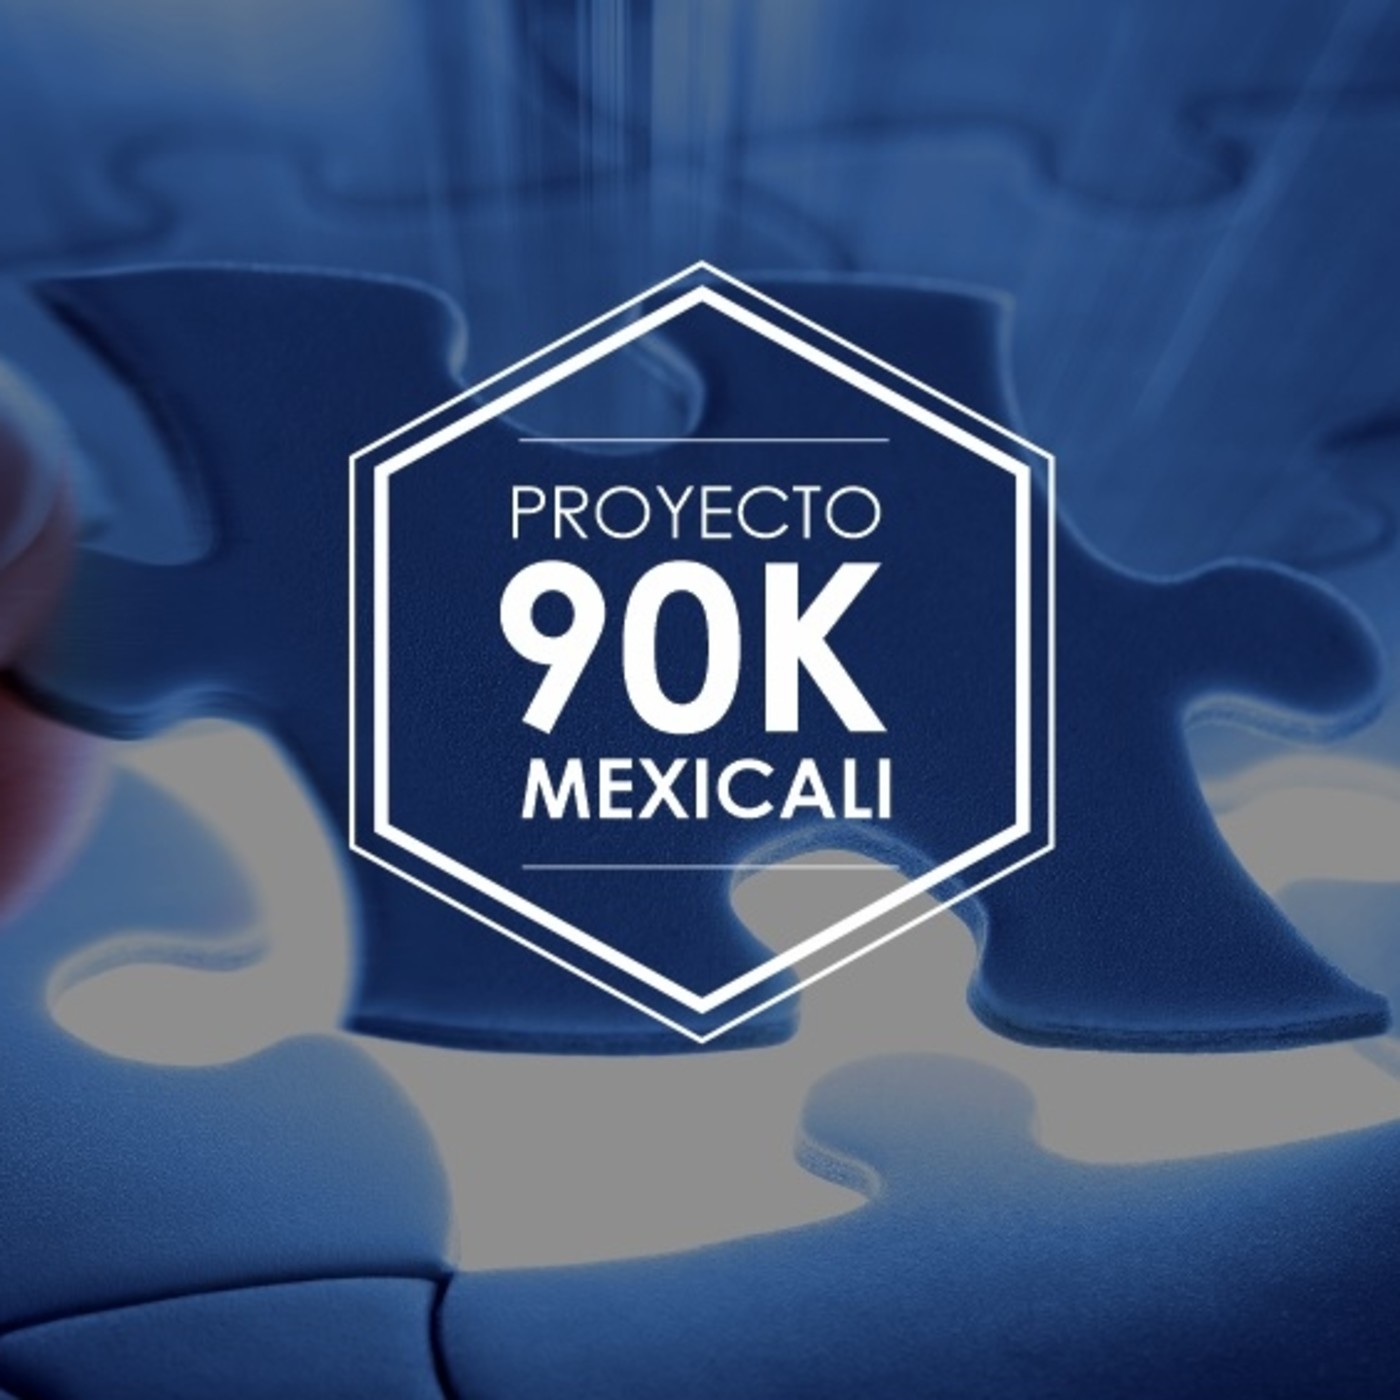 PROYECTO 90K MEXICALI 2